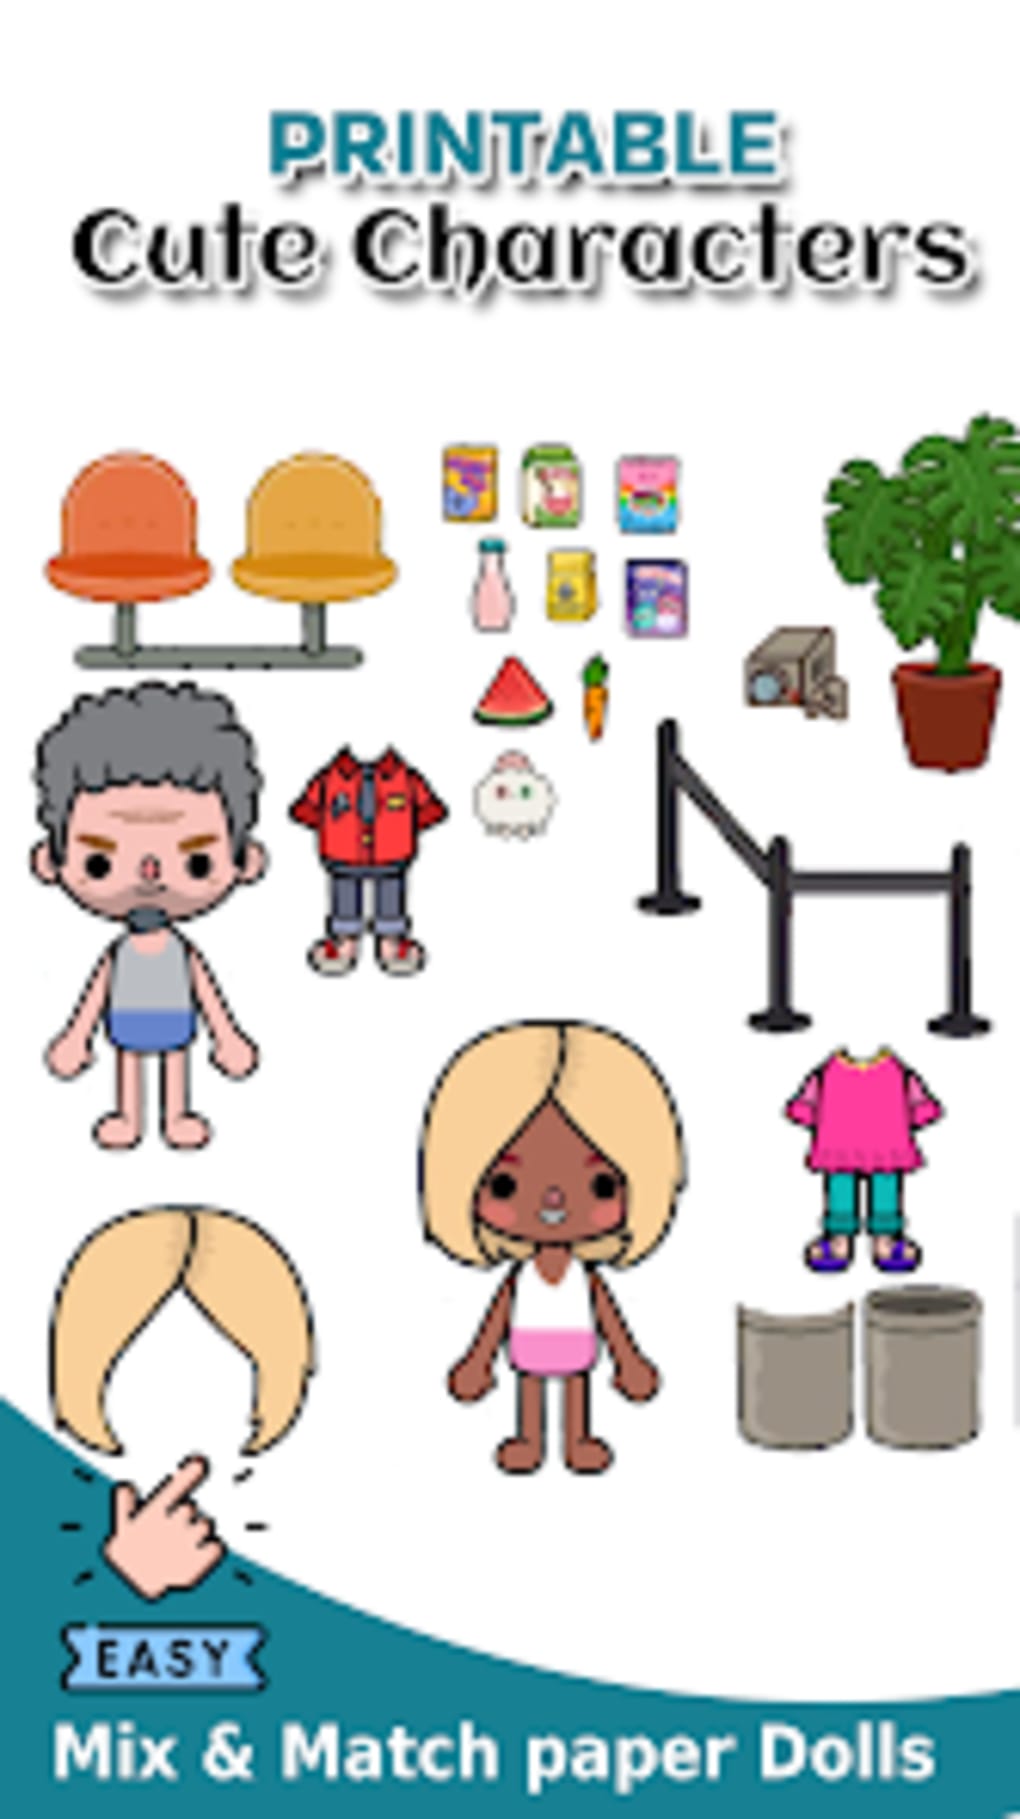 Paper Toca Dolls of Boca Craft for Android - Download